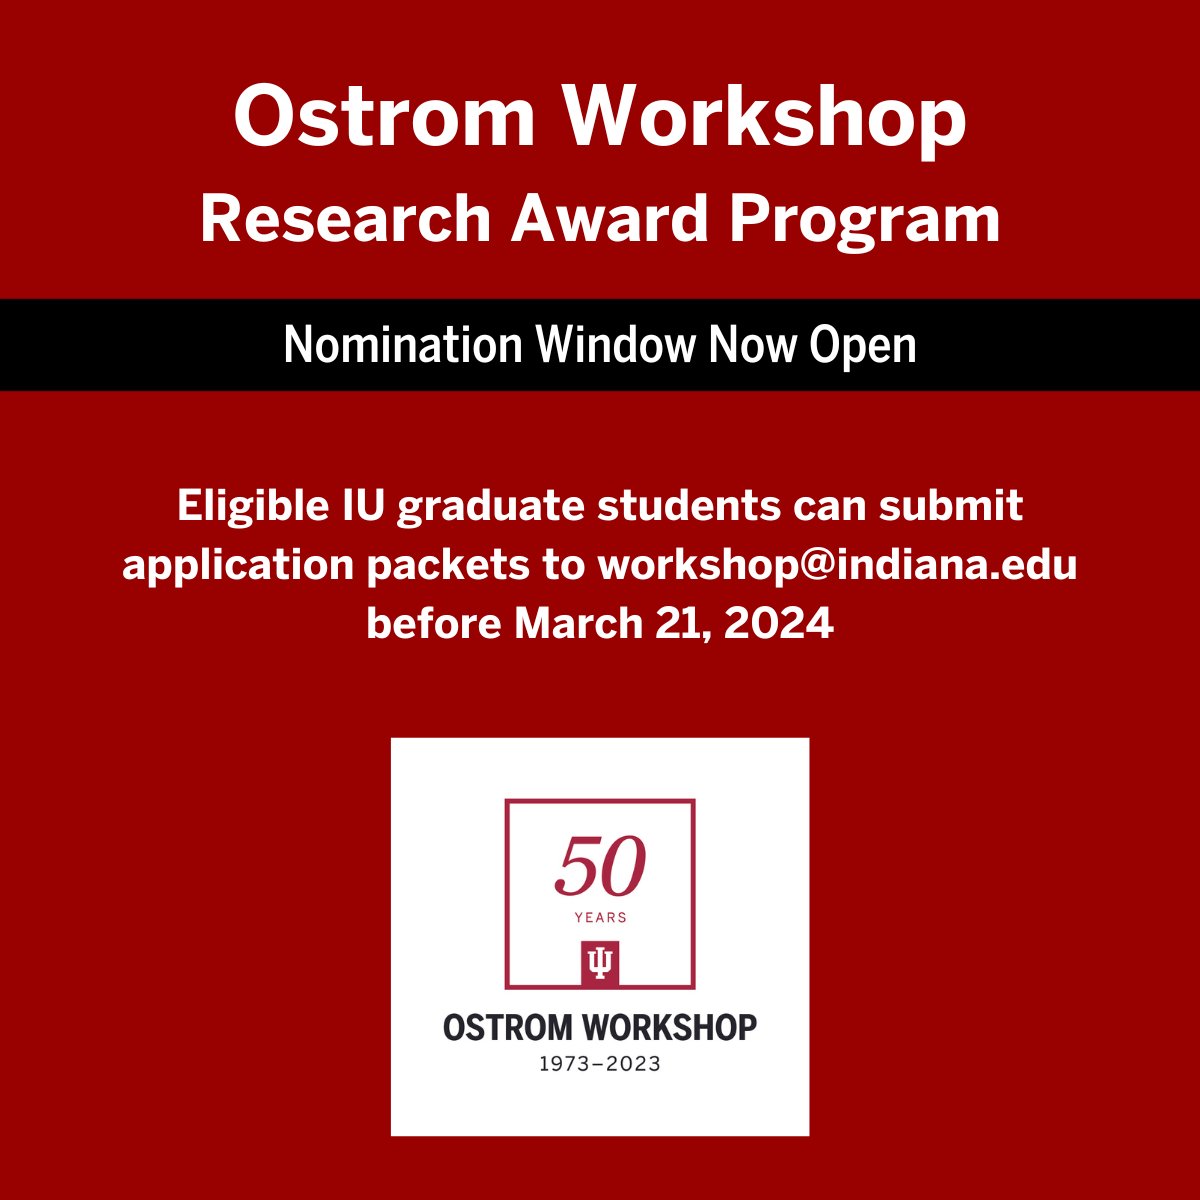 Each year the Ostrom Workshop provides Research Awards to IU Graduate Students with diverse backgrounds and research interests. Apply today! ostromworkshop.indiana.edu/funding-propos…